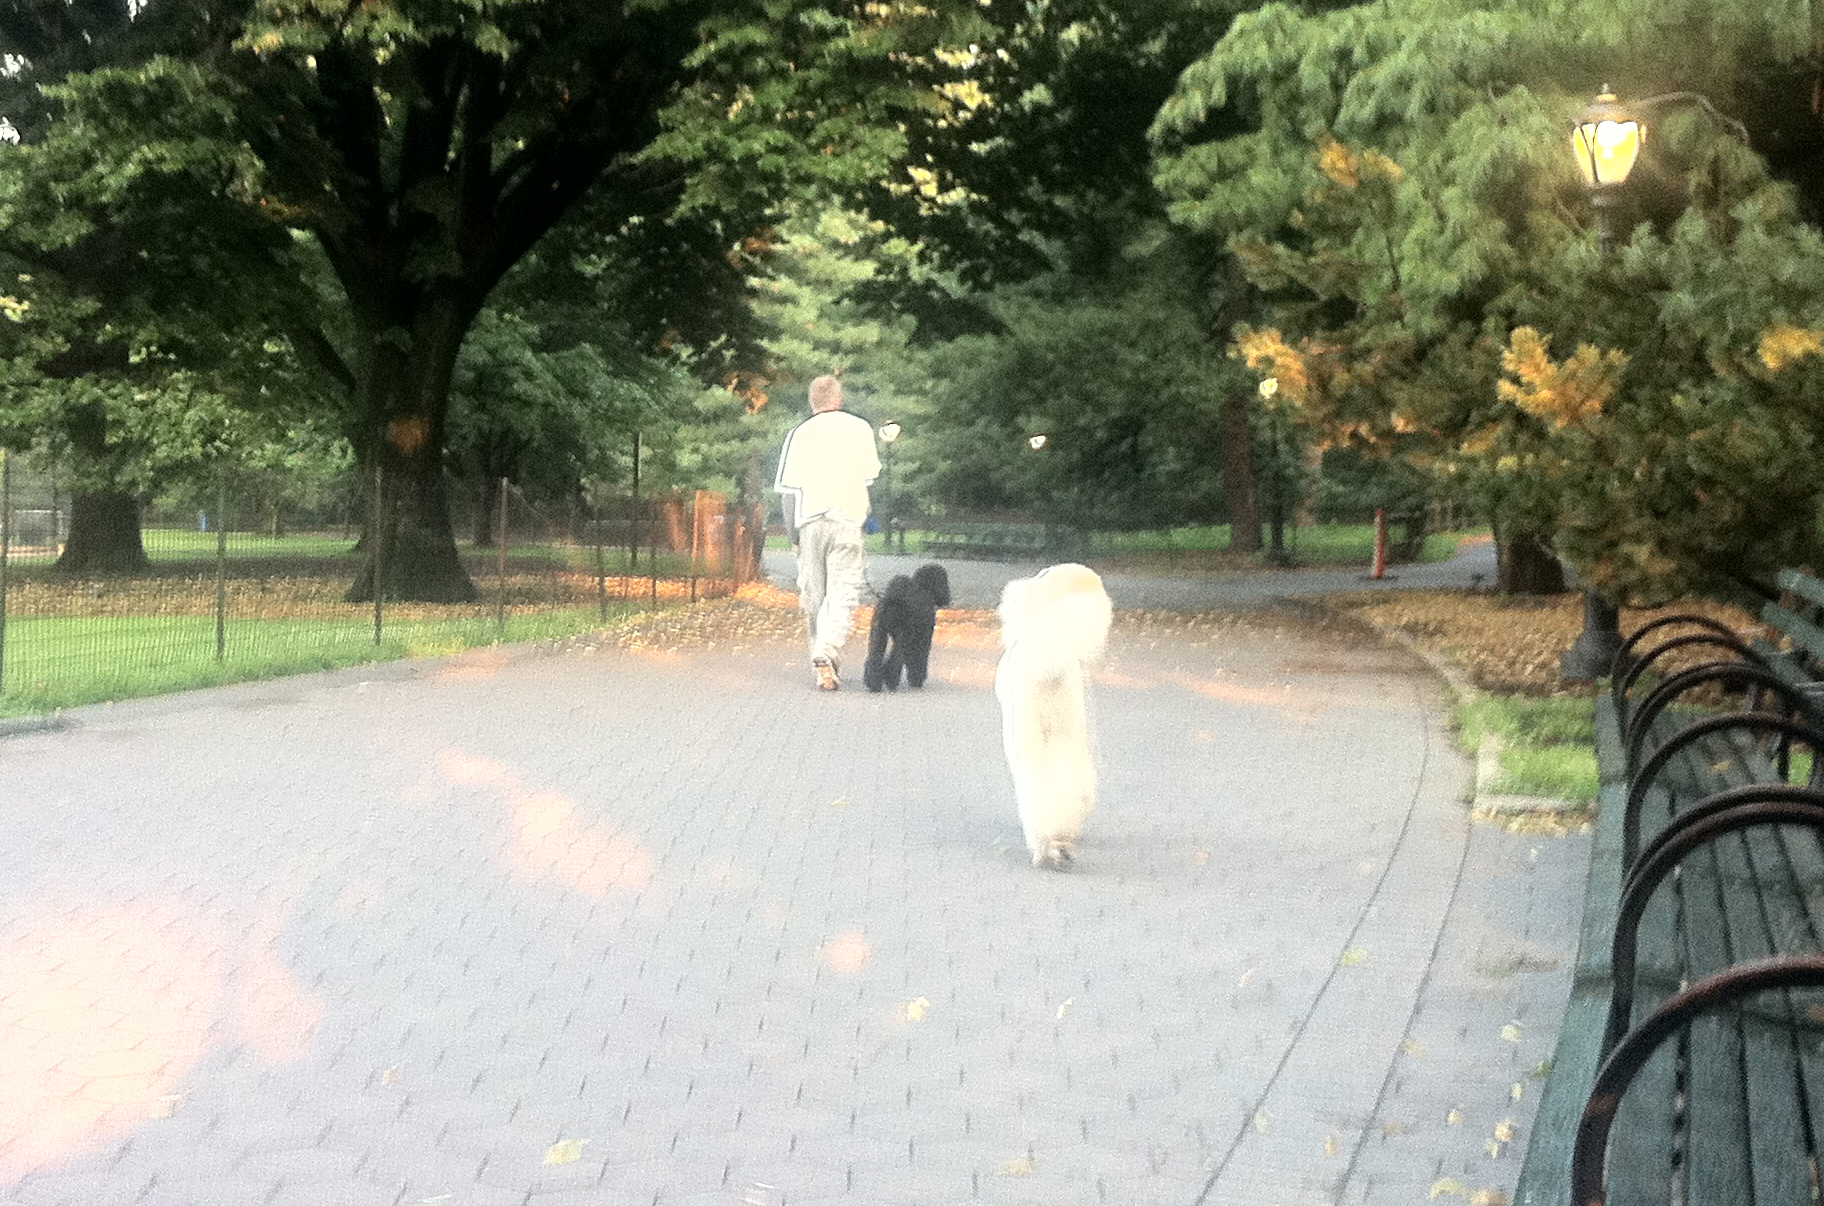 The Dog Walker Who Doesn't Care About You